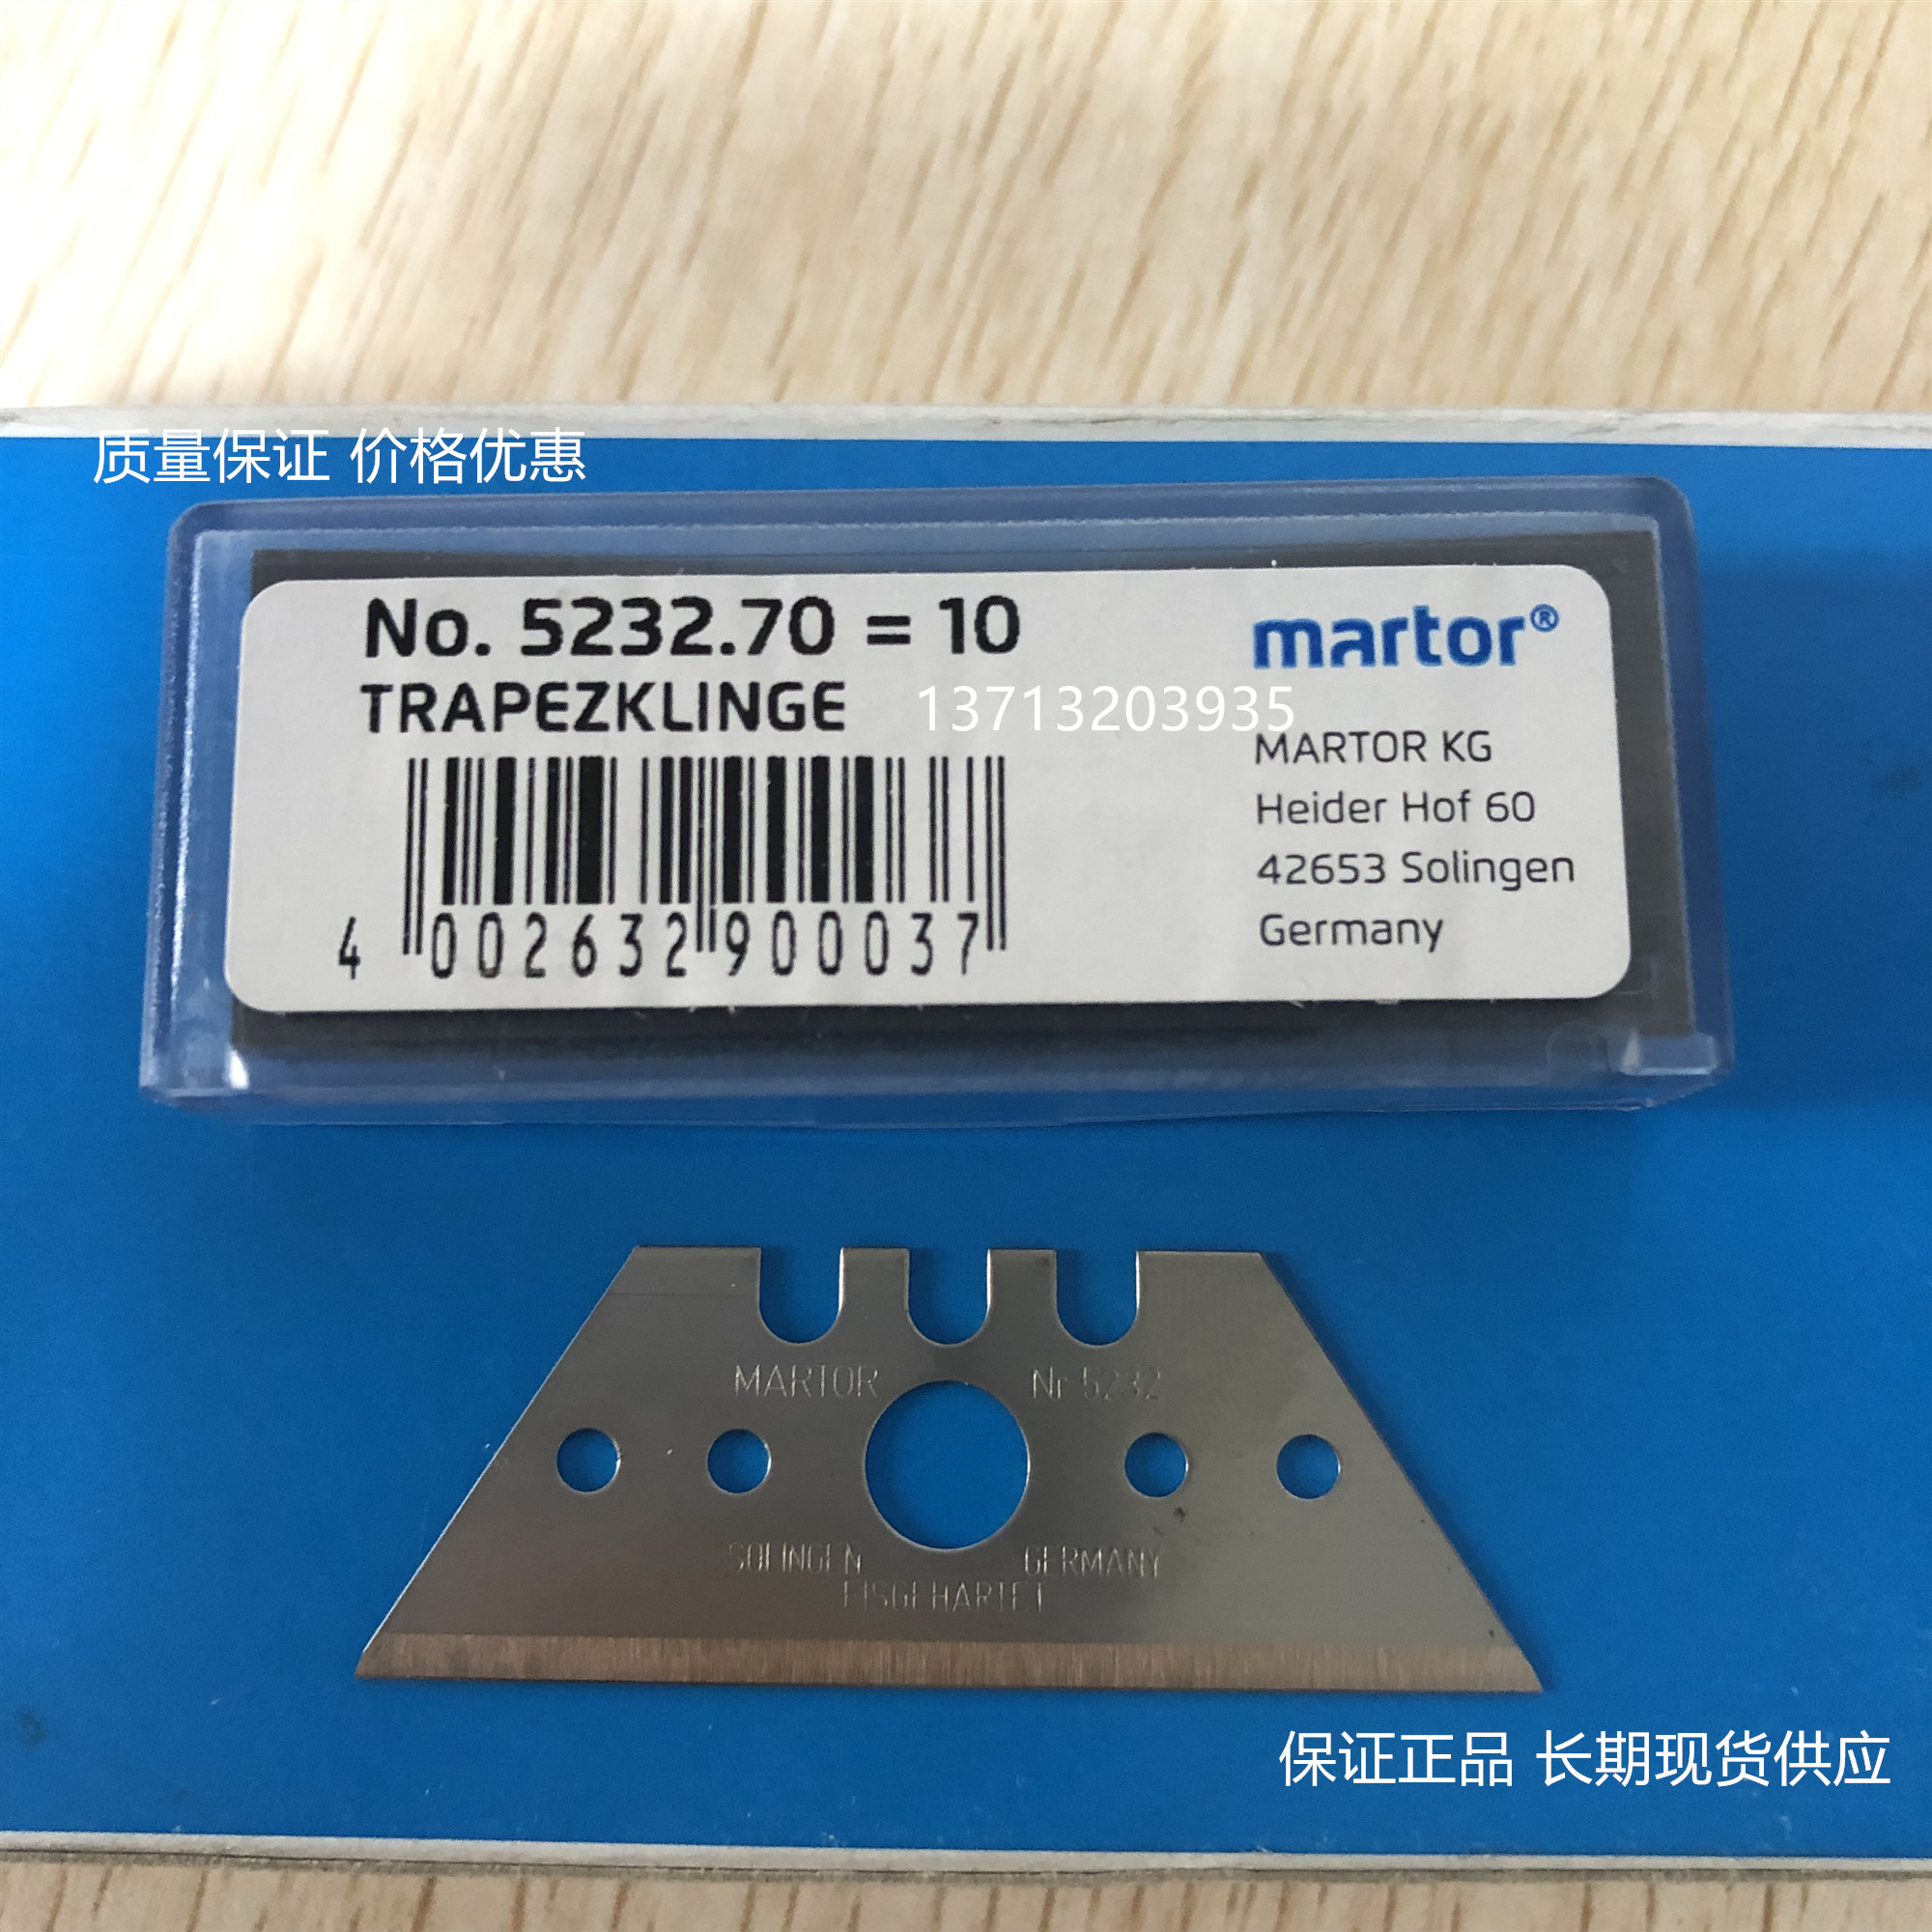 Germany's MARTOR imports sharp industrial blades, stainless steel blades, trapezoidal knives